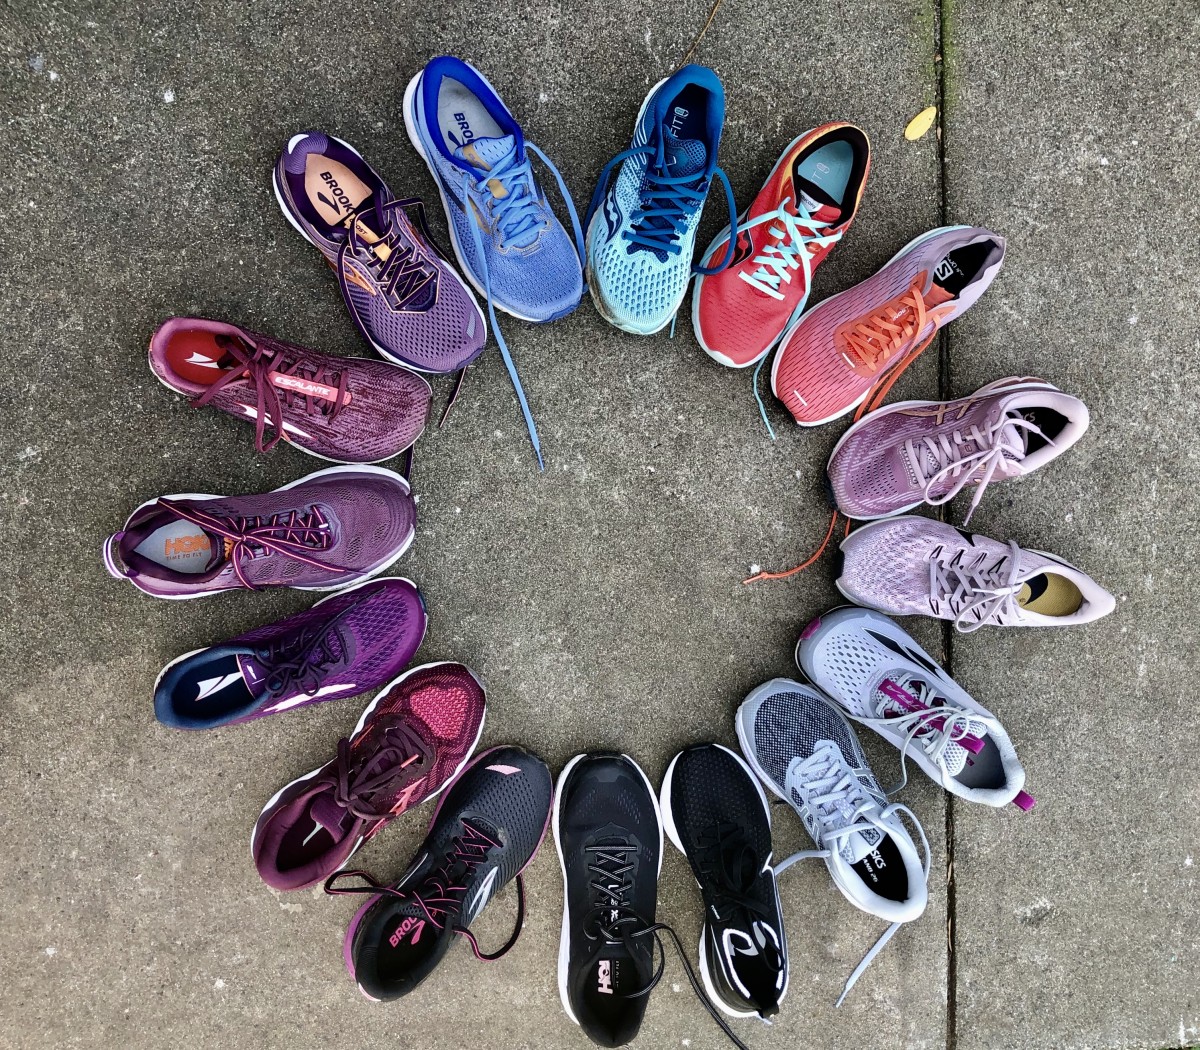 How to Choose Running Shoes for Women